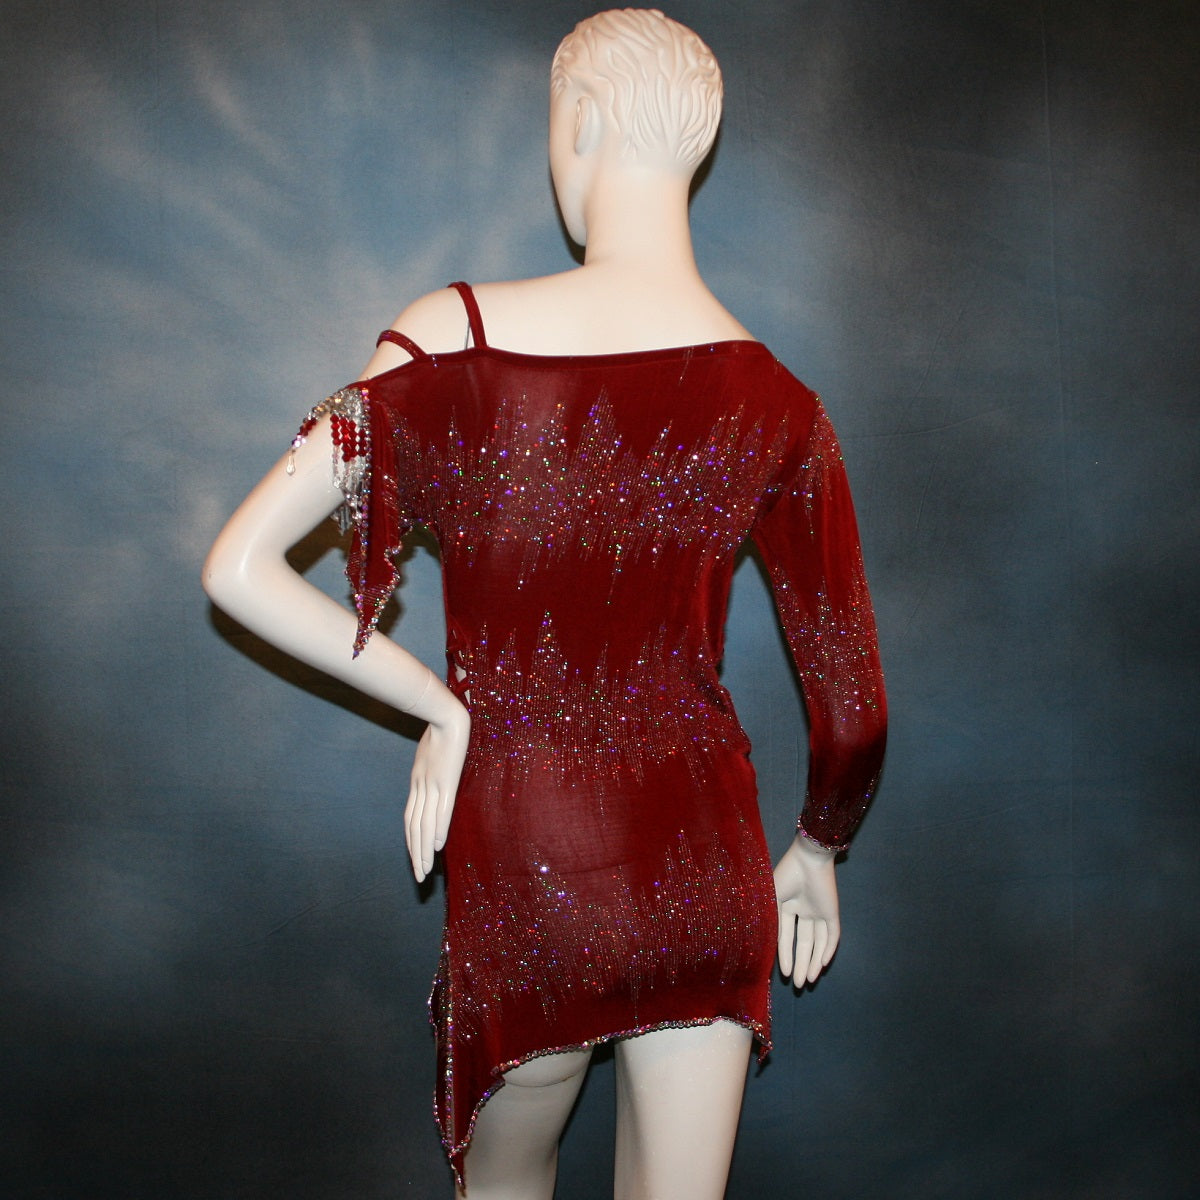 close back view of Deep scarlette red Latin rhythm dress created in glitter slinky with an awesome electrifying glitter pattern features lattice detailing in the sides, one long sleeve & interesting detailing on the opposite shoulder with Swarovski hand beading & Crystal Ab rhinestone work edging the skirting, split cape sleeve & long sleeve.